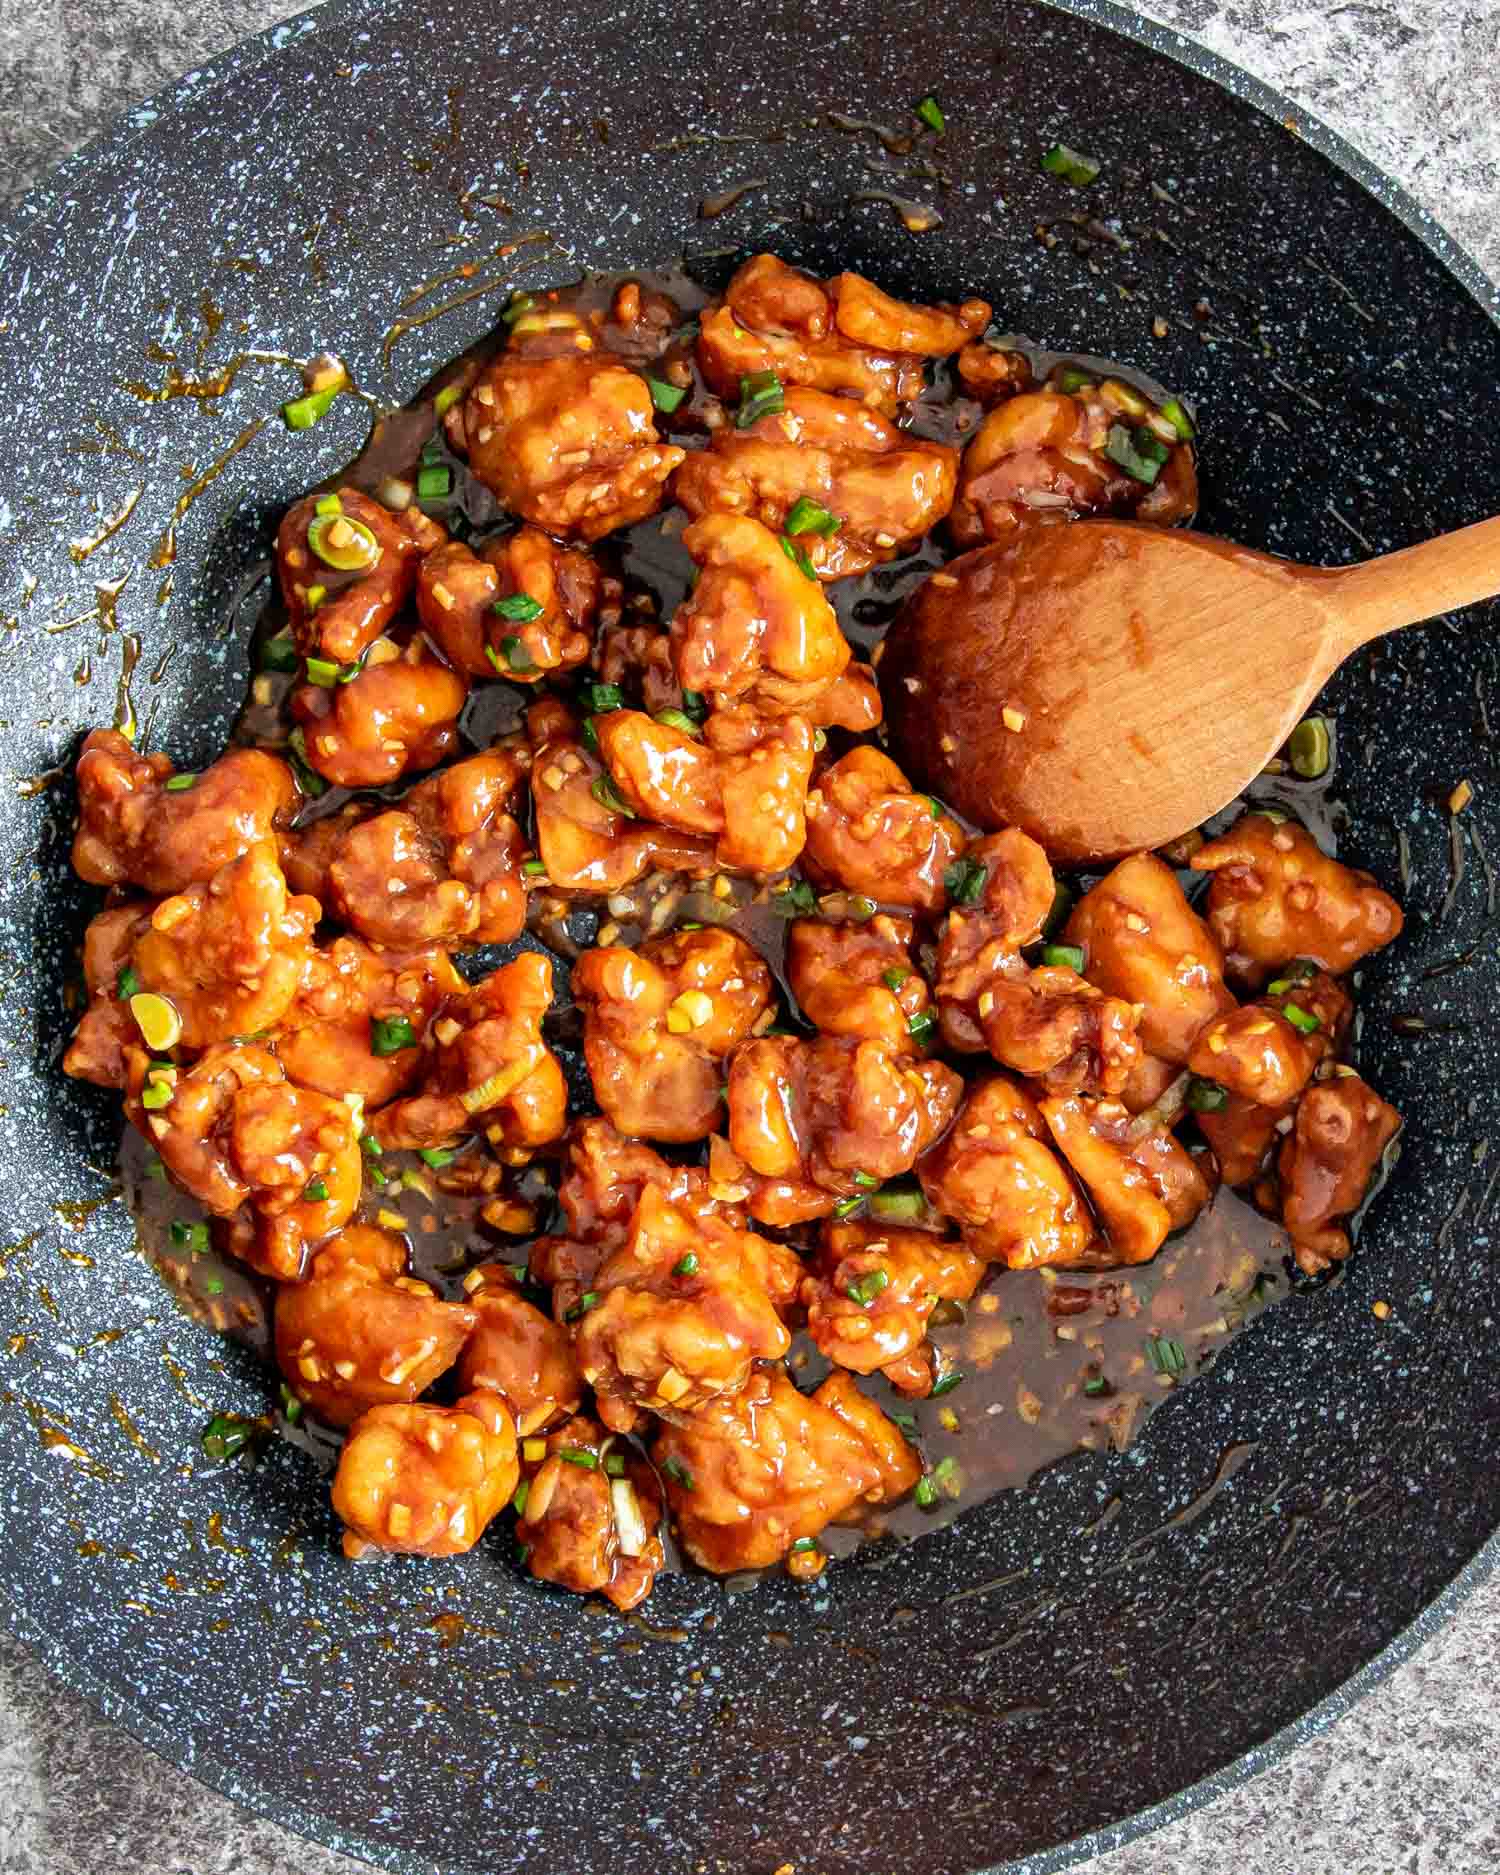 freshly made general tso's chicken in a wok.